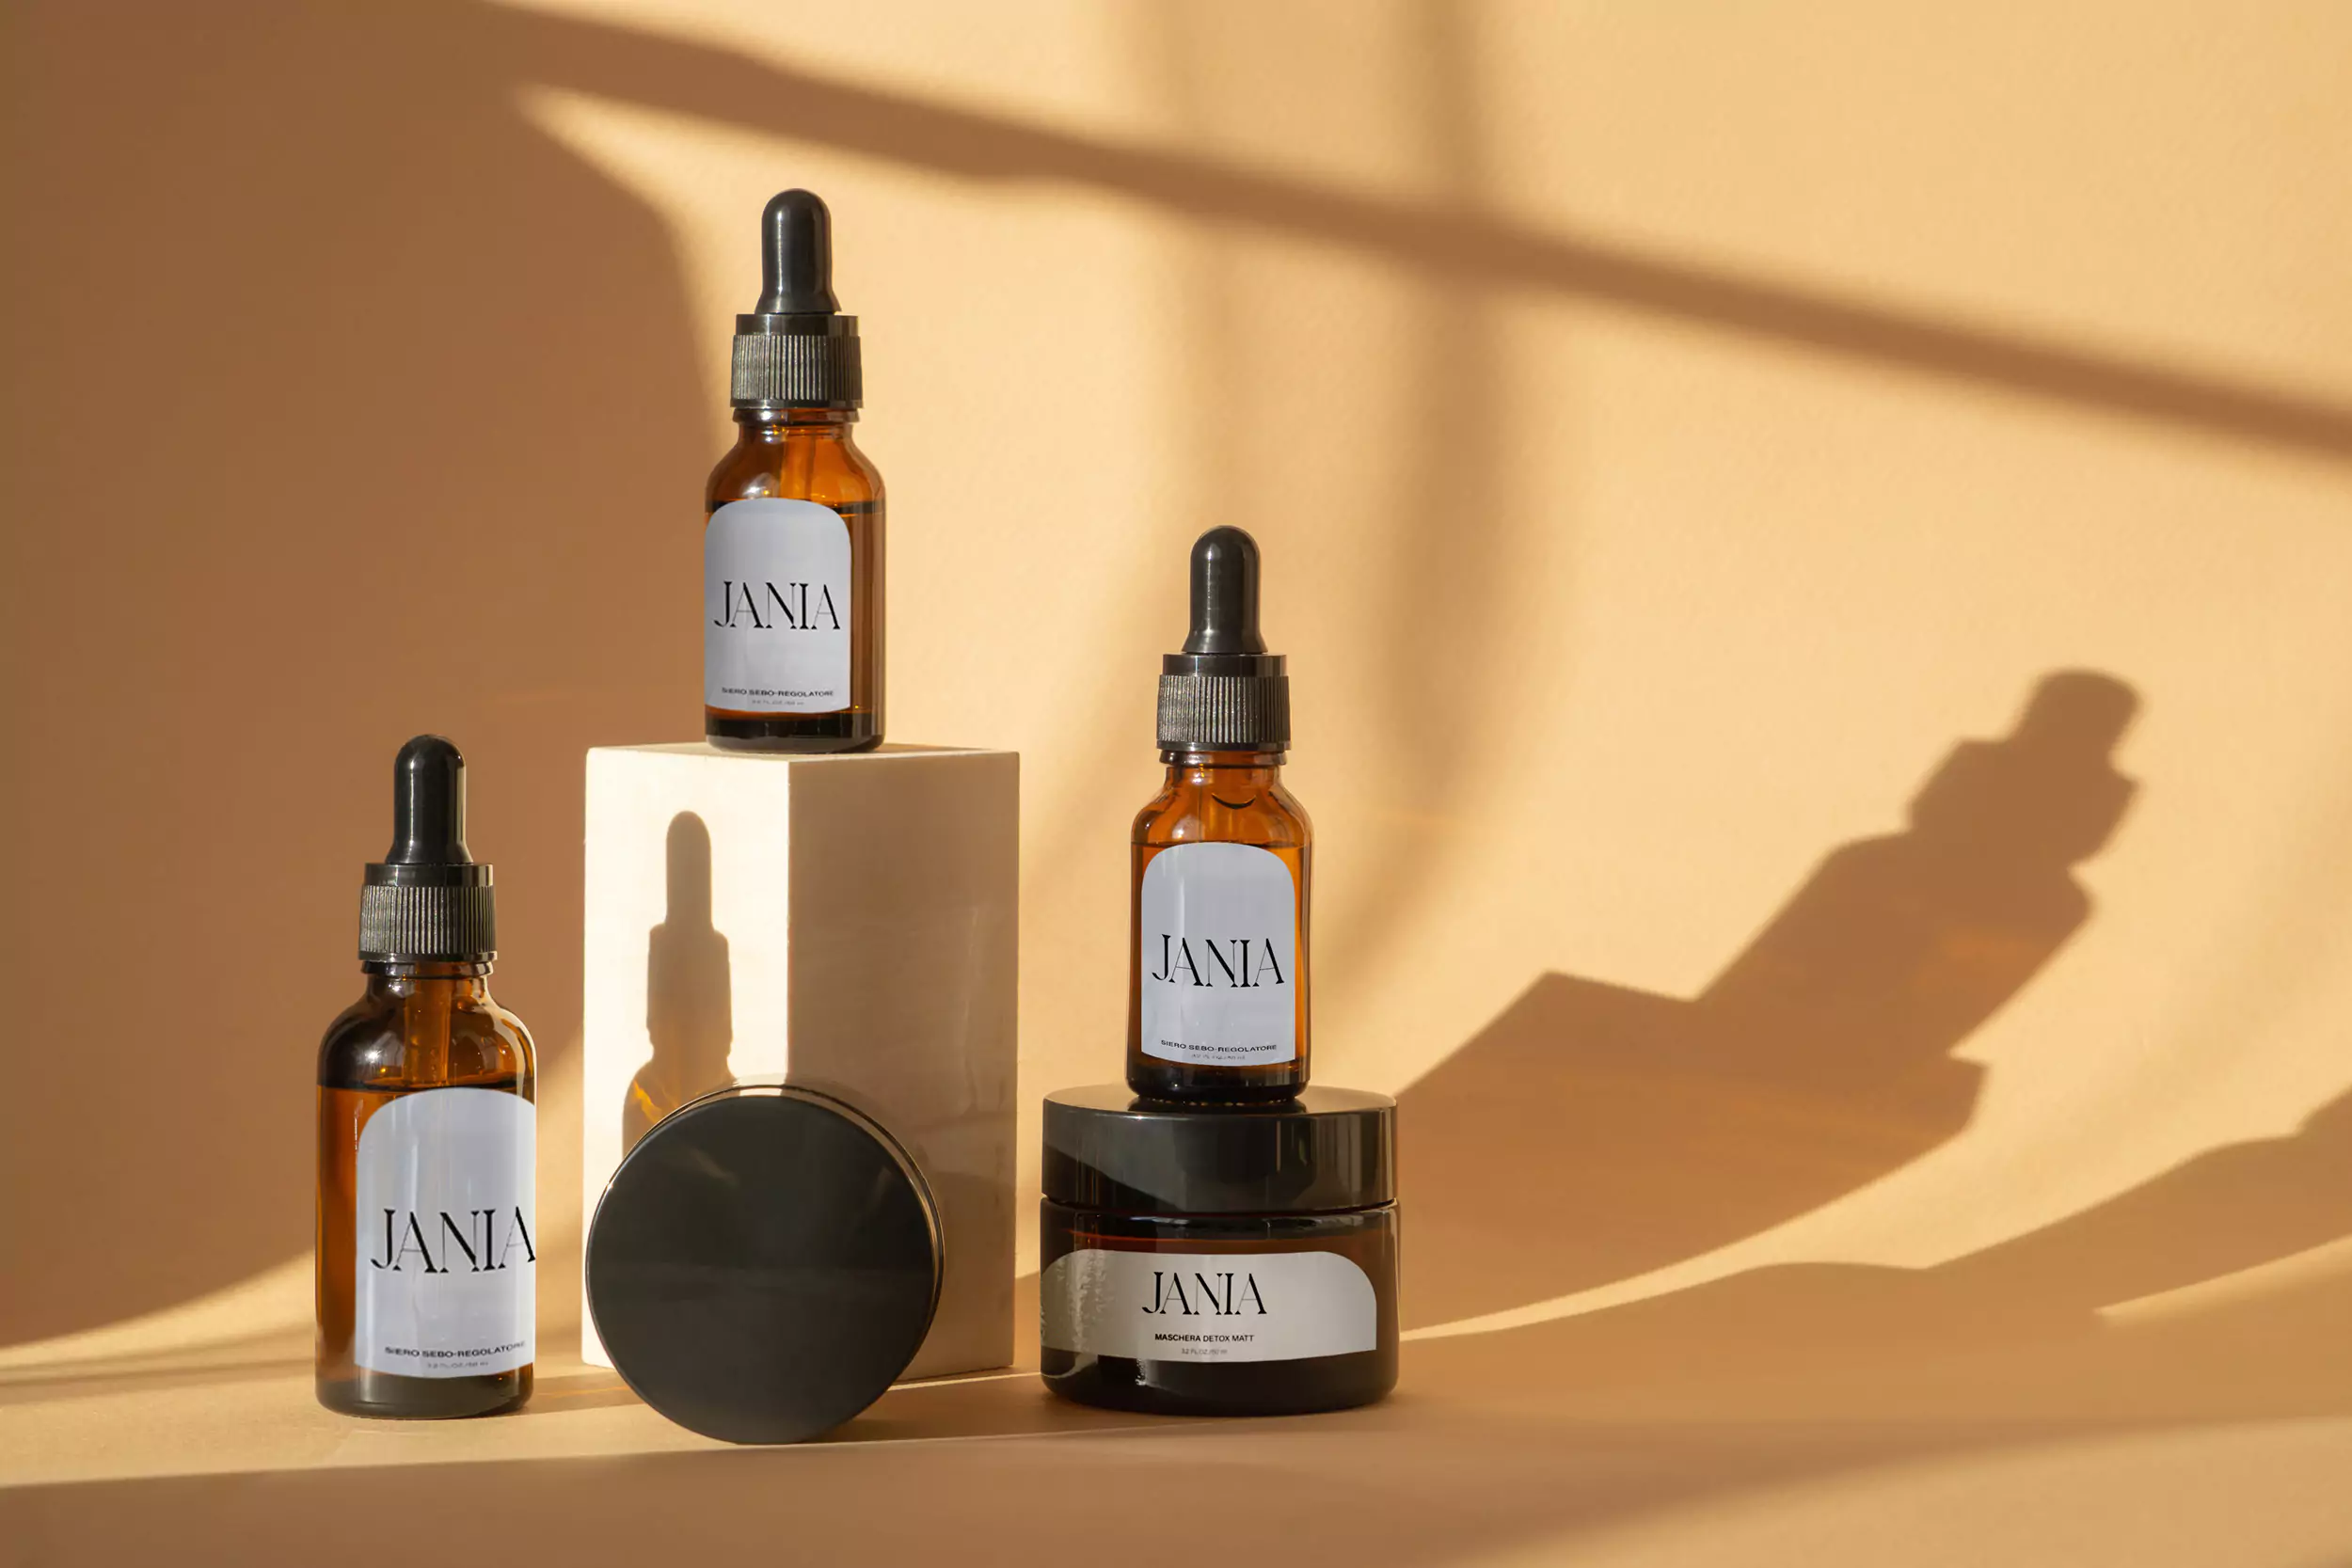 Brand Identity for Jania - Packaging Design Set